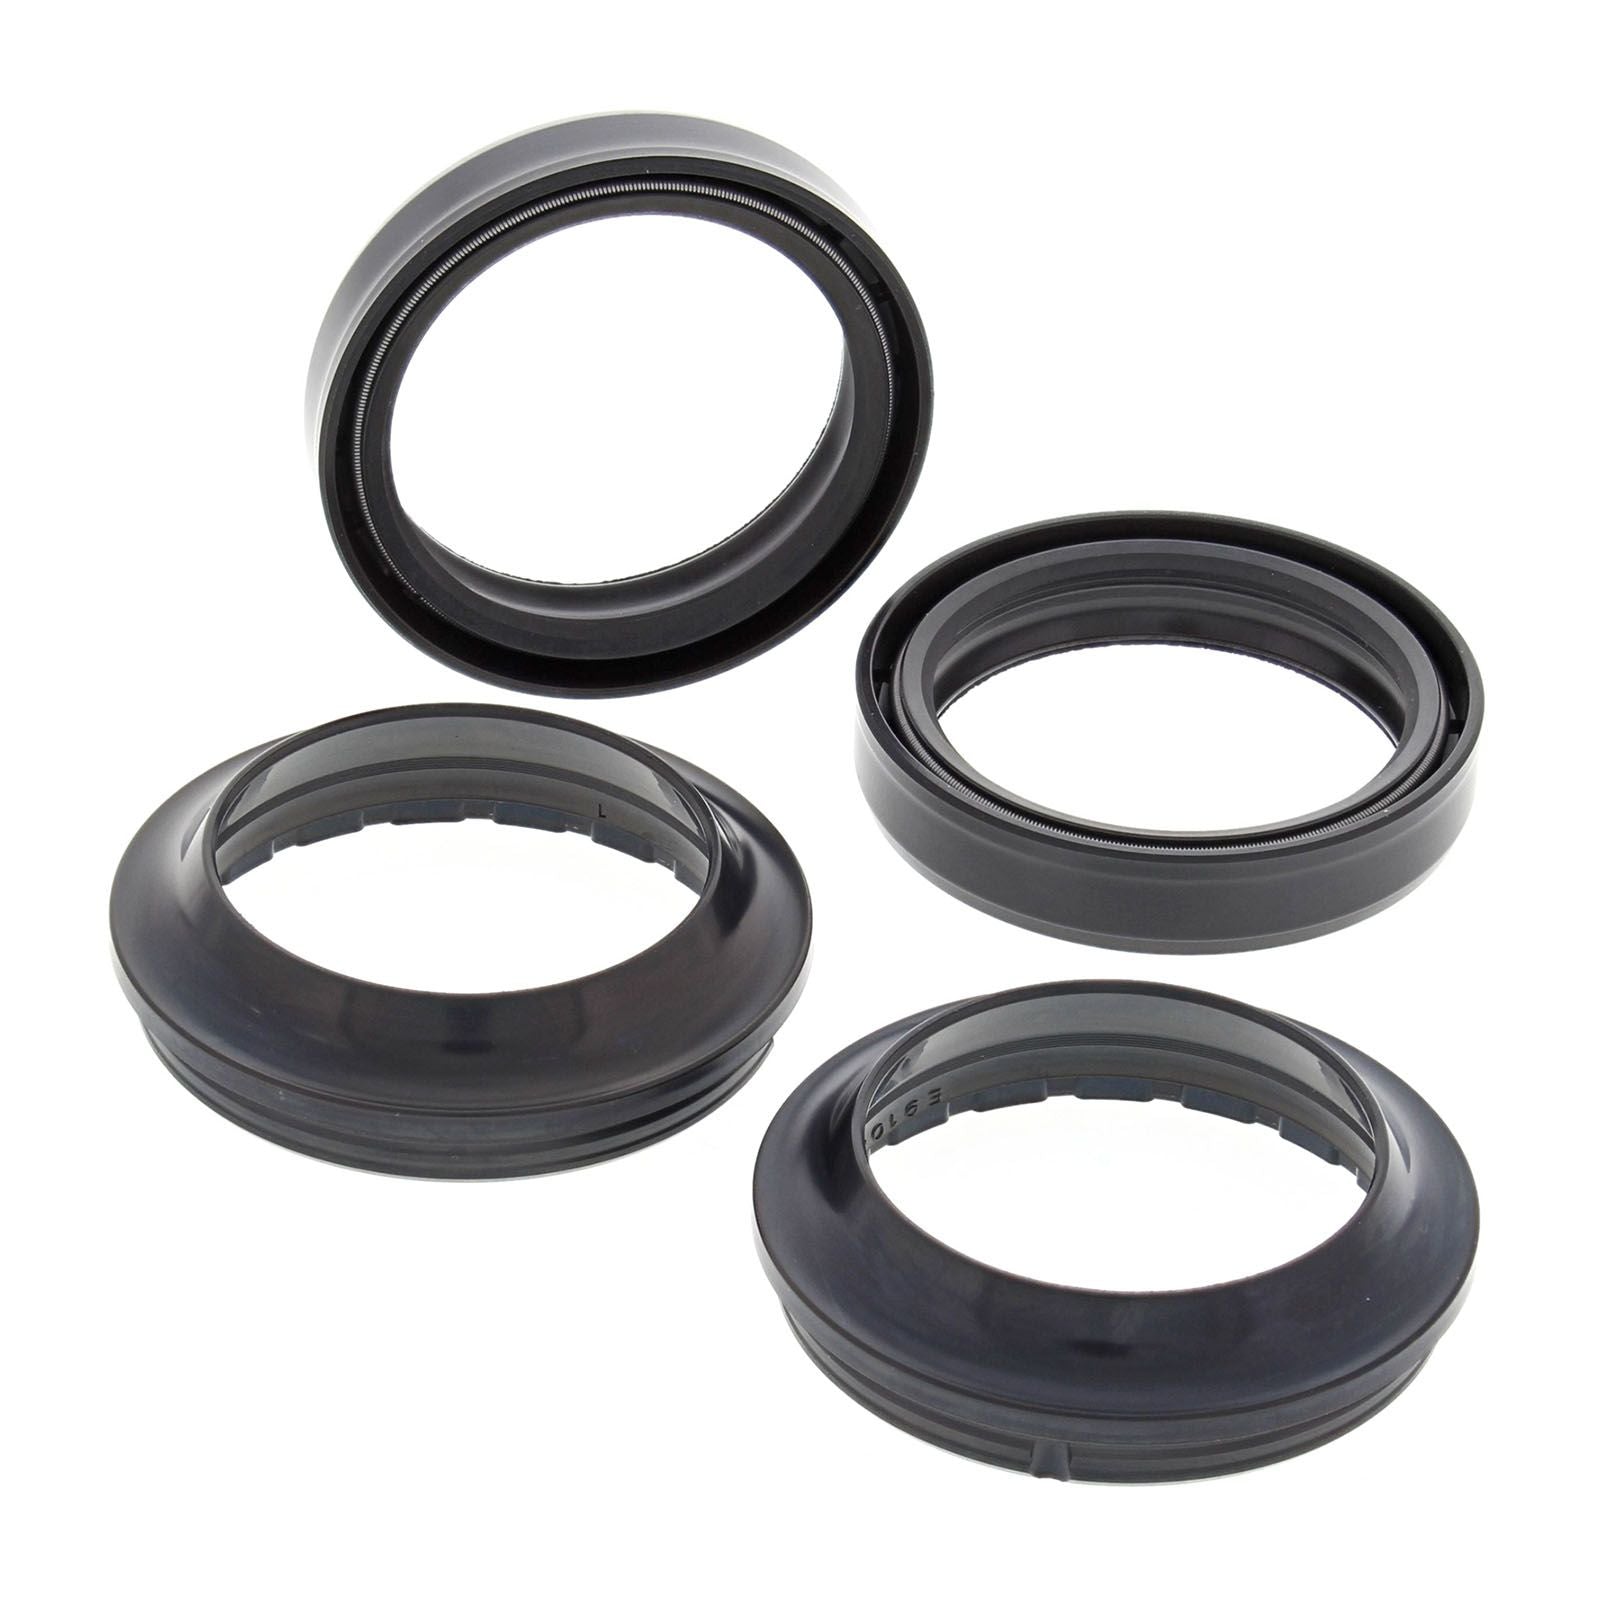 New ALL BALLS Racing Dust and Fork Seal Kit #AB561331